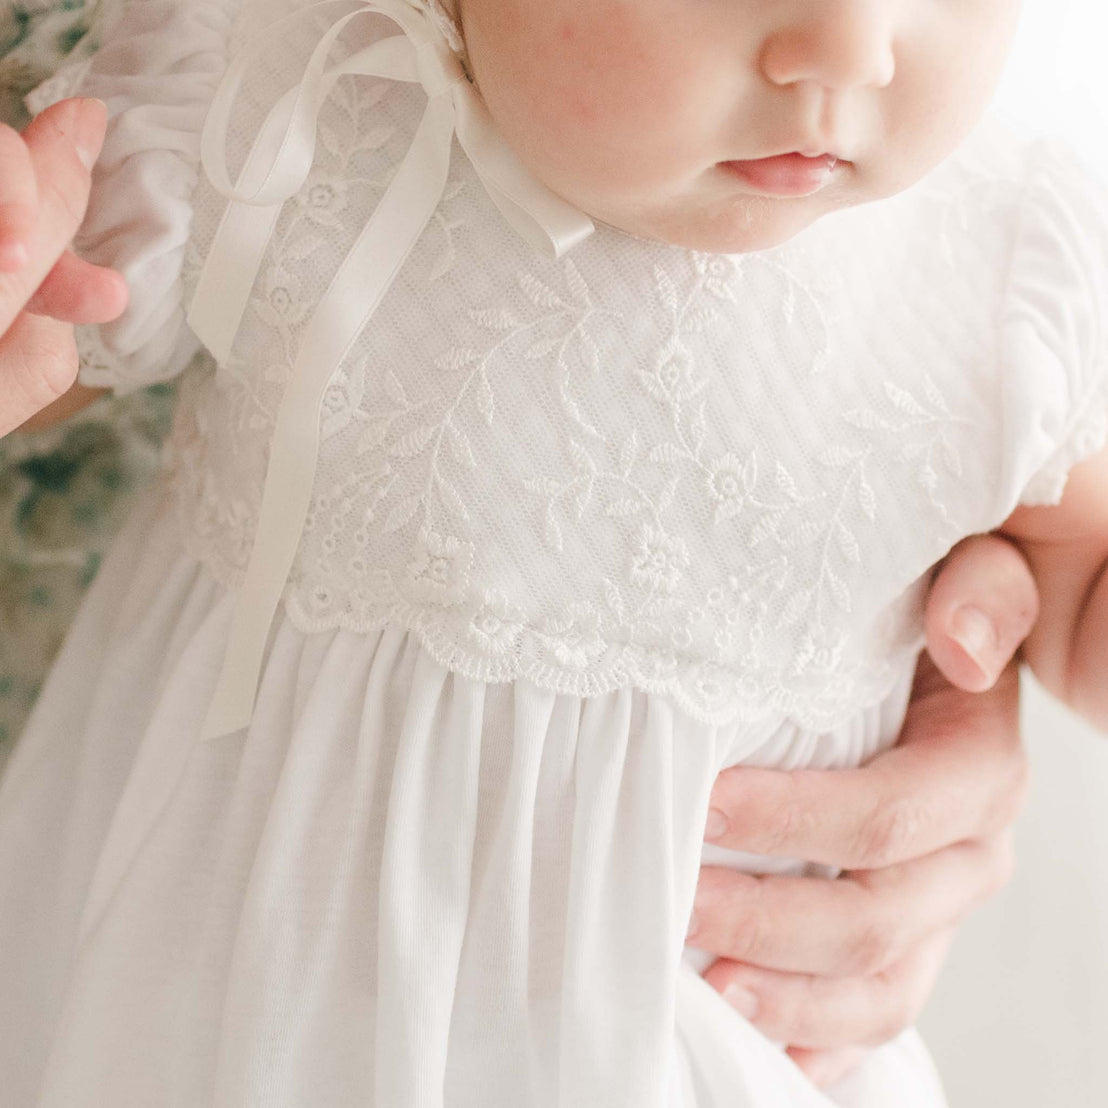 Ella floral lace detail on baby layette gown